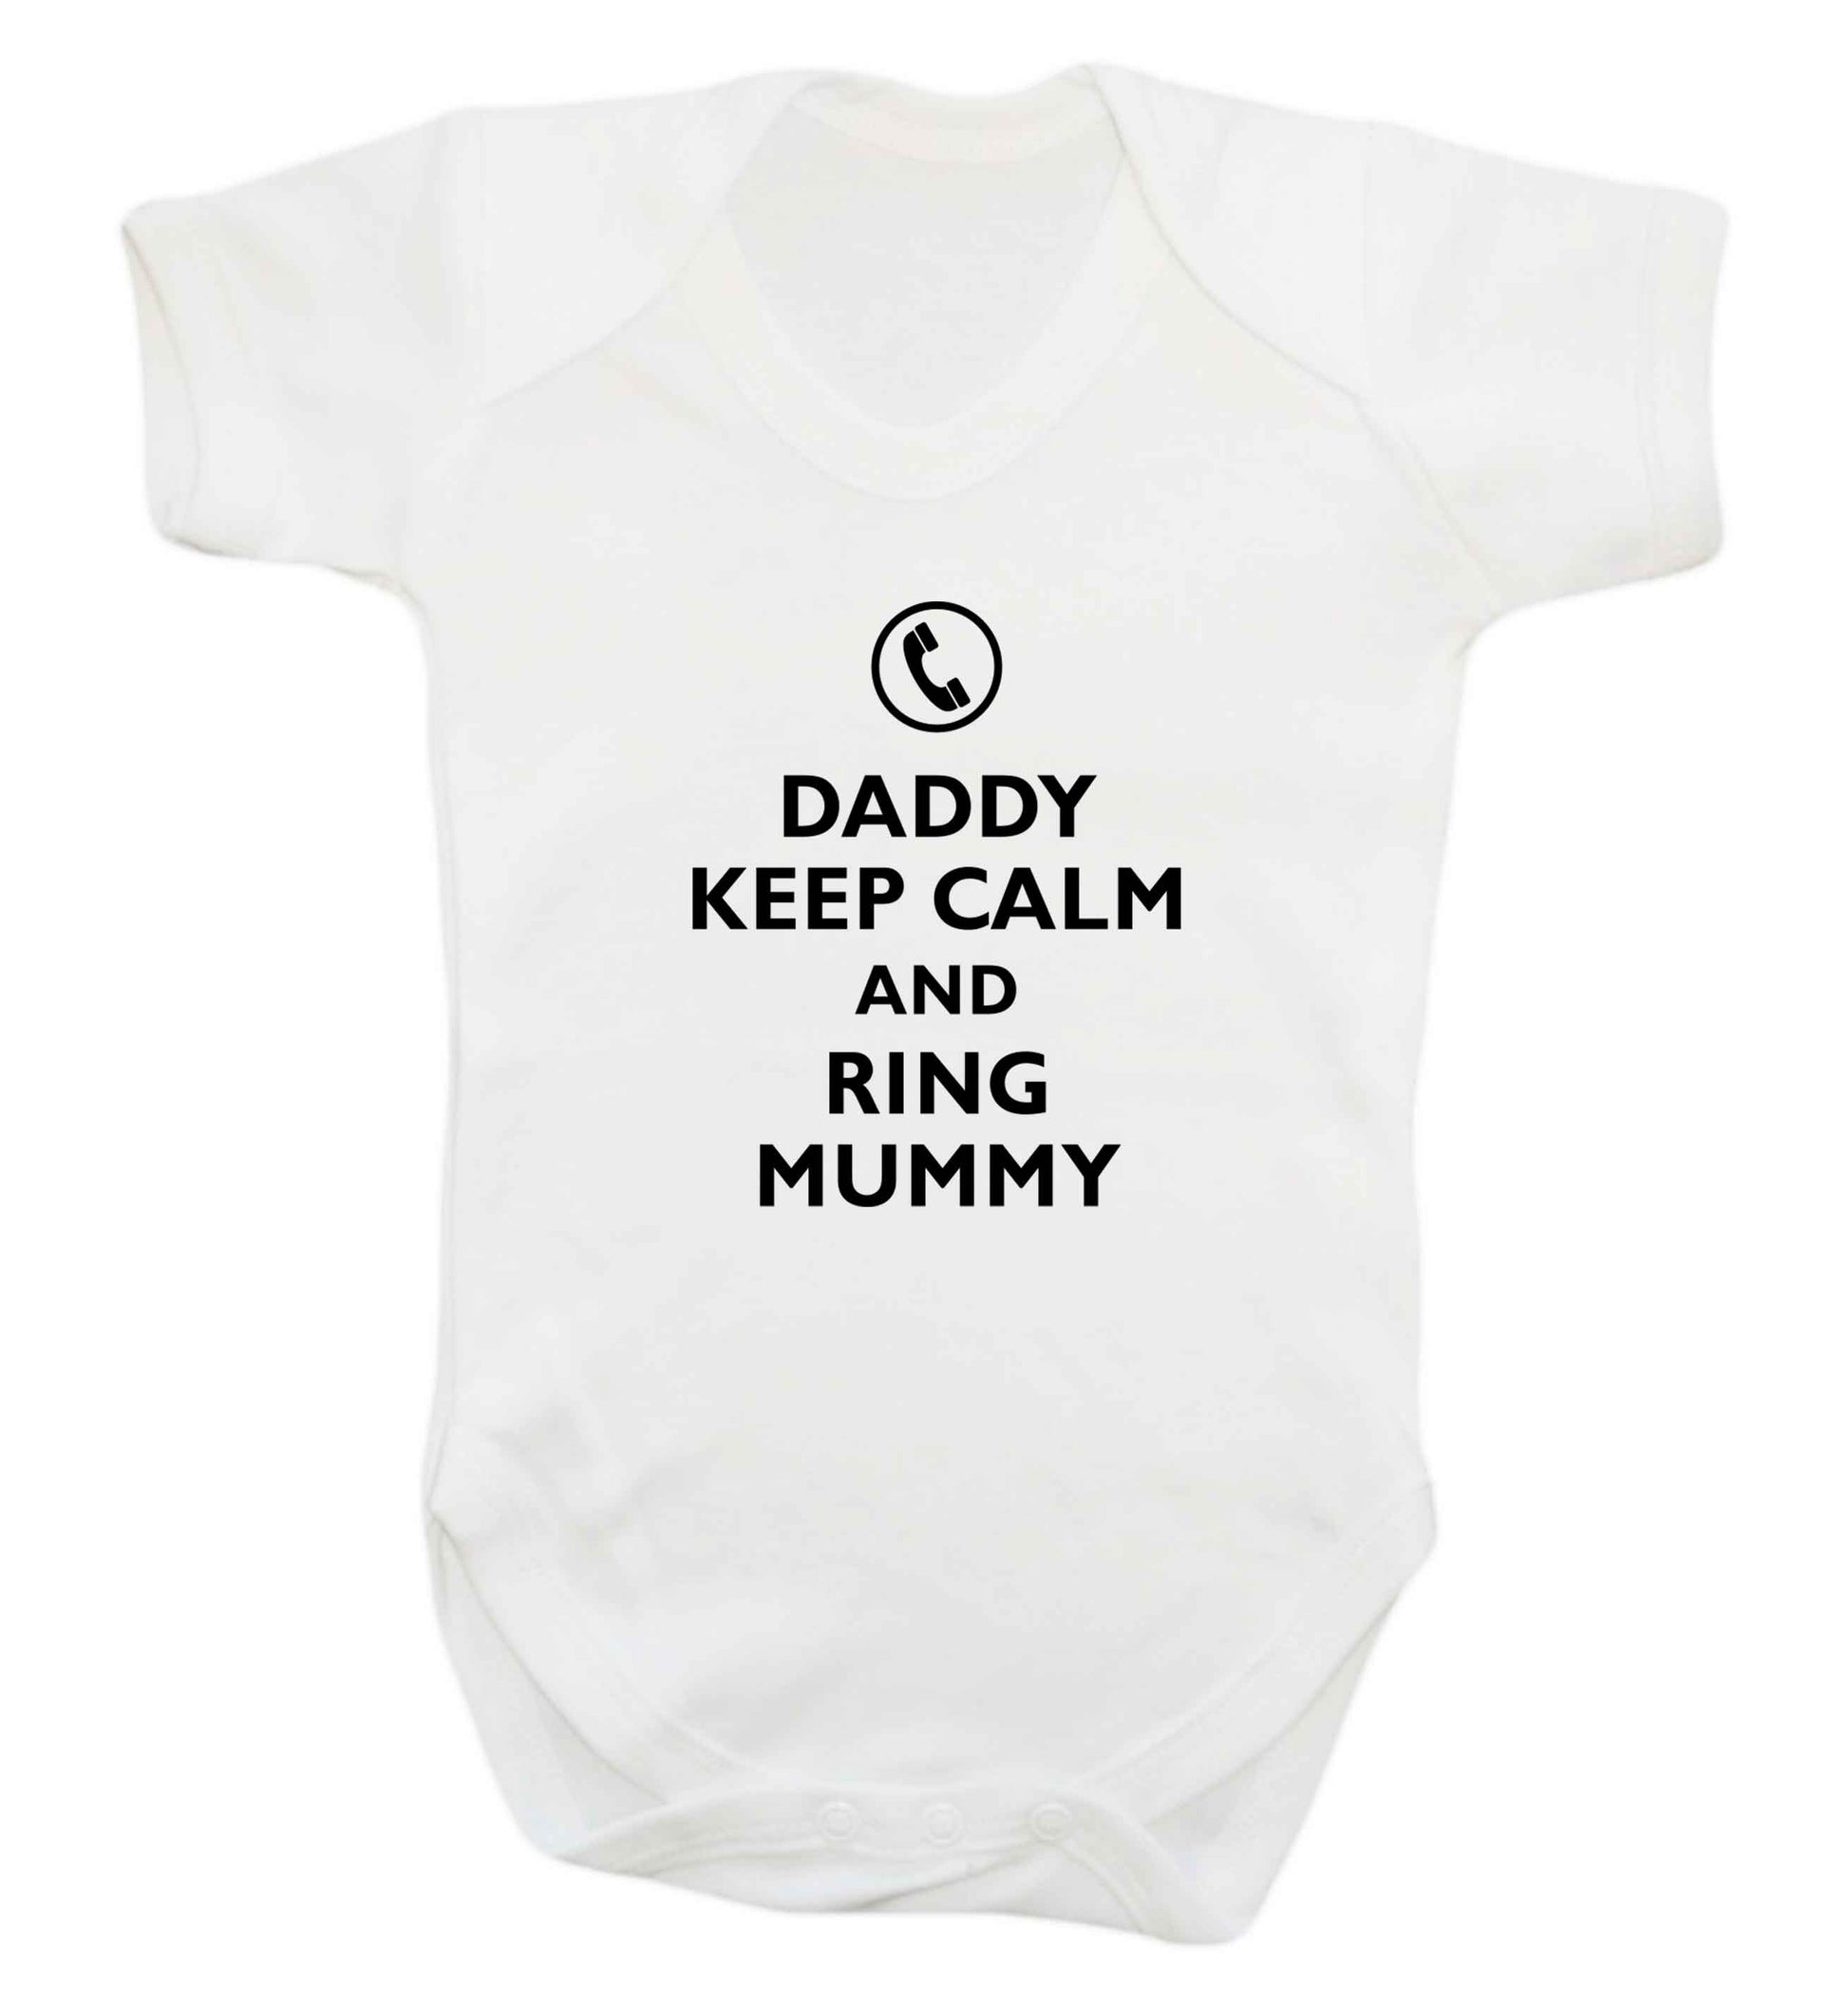 Daddy keep calm and ring mummy baby vest white 18-24 months